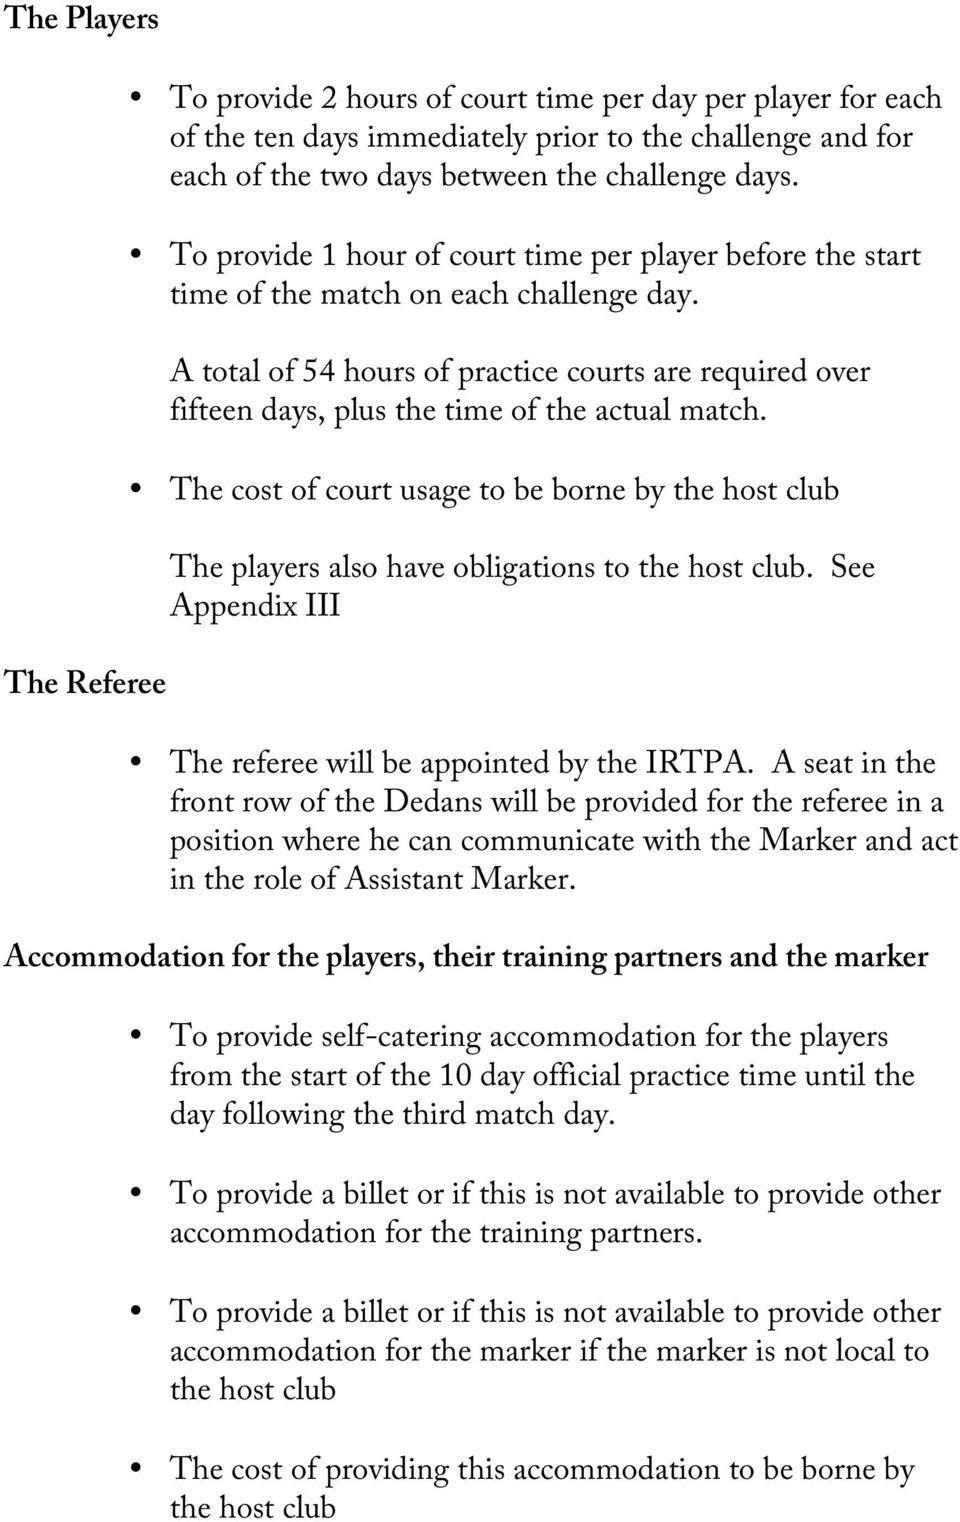 A total of 54 hours of practice courts are required over fifteen days, plus the time of the actual match.